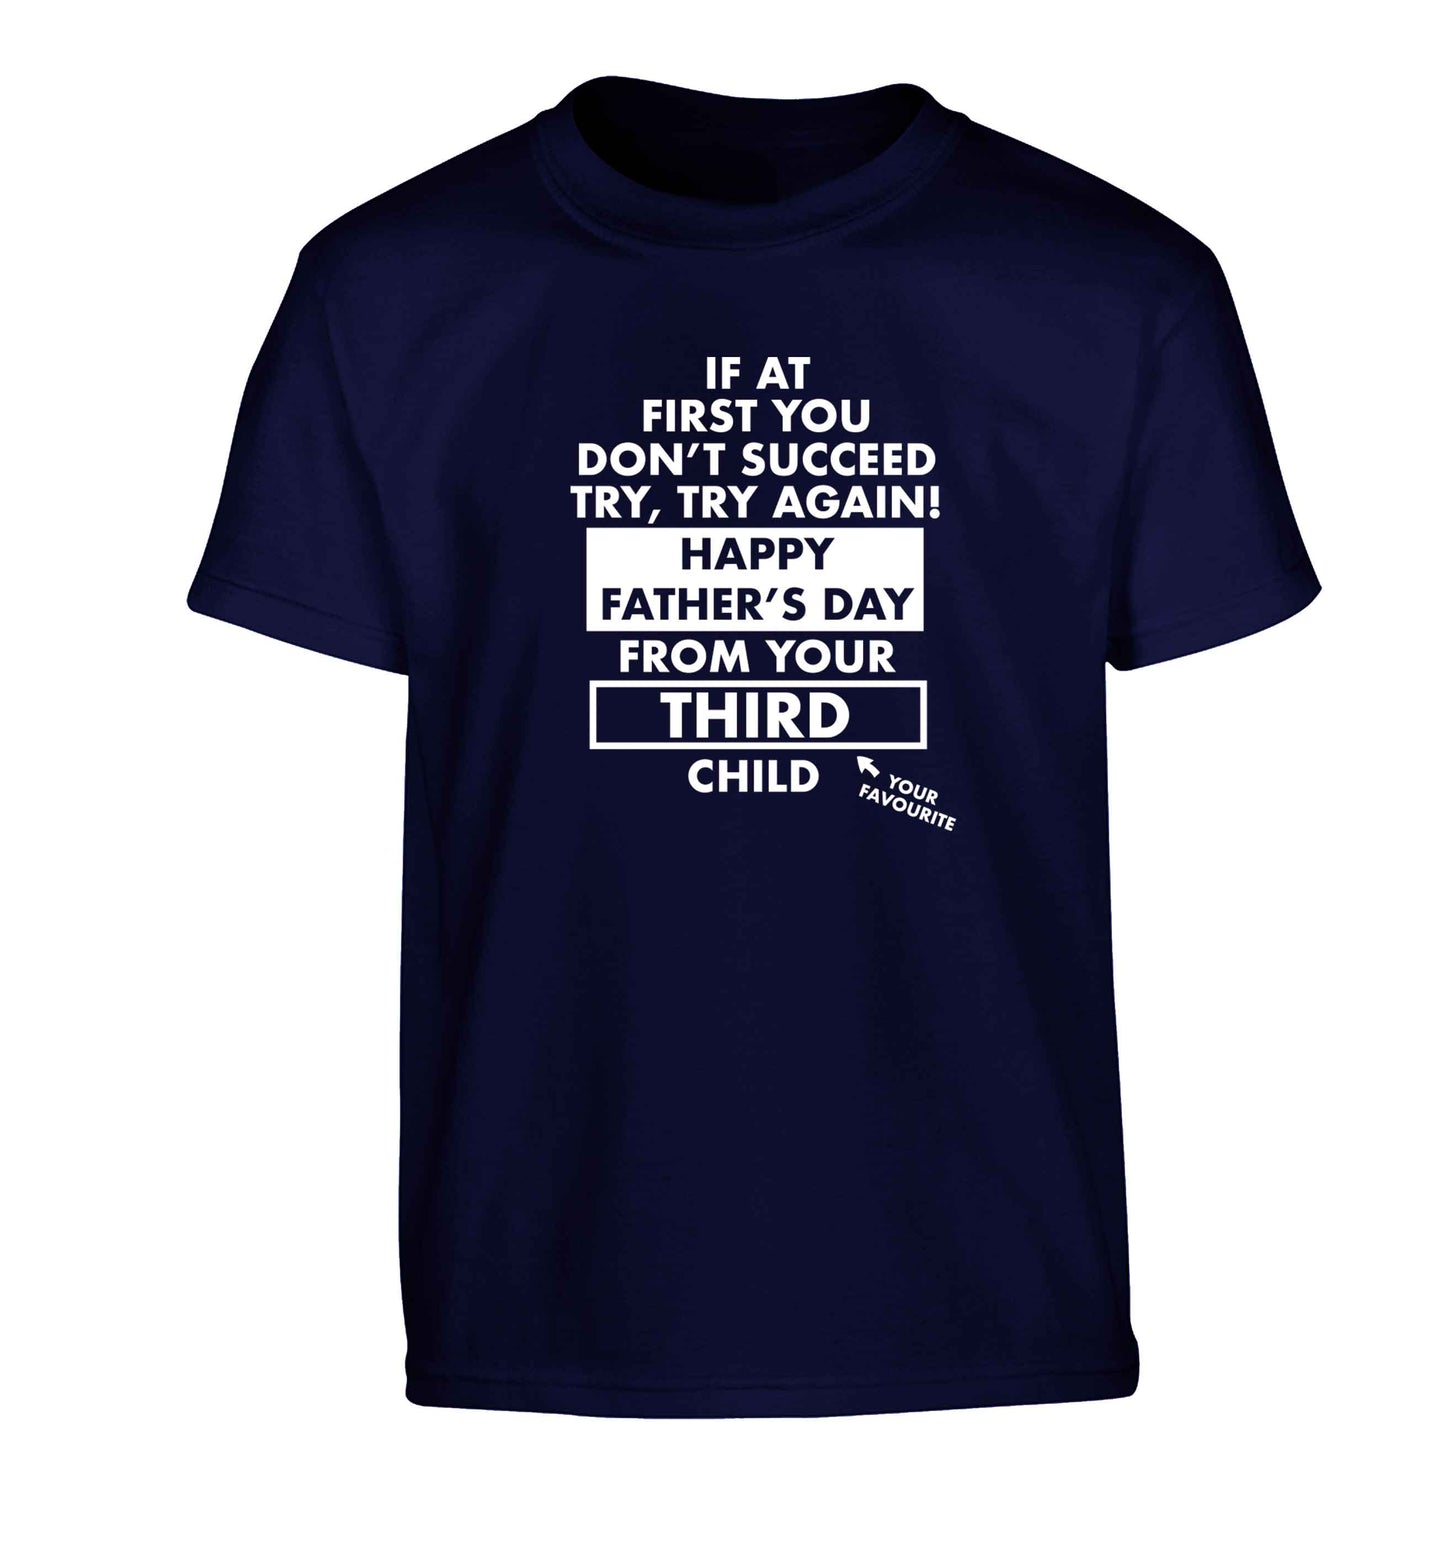 If at first you don't succeed try, try again Happy Father's day from your third child! Children's navy Tshirt 12-13 Years